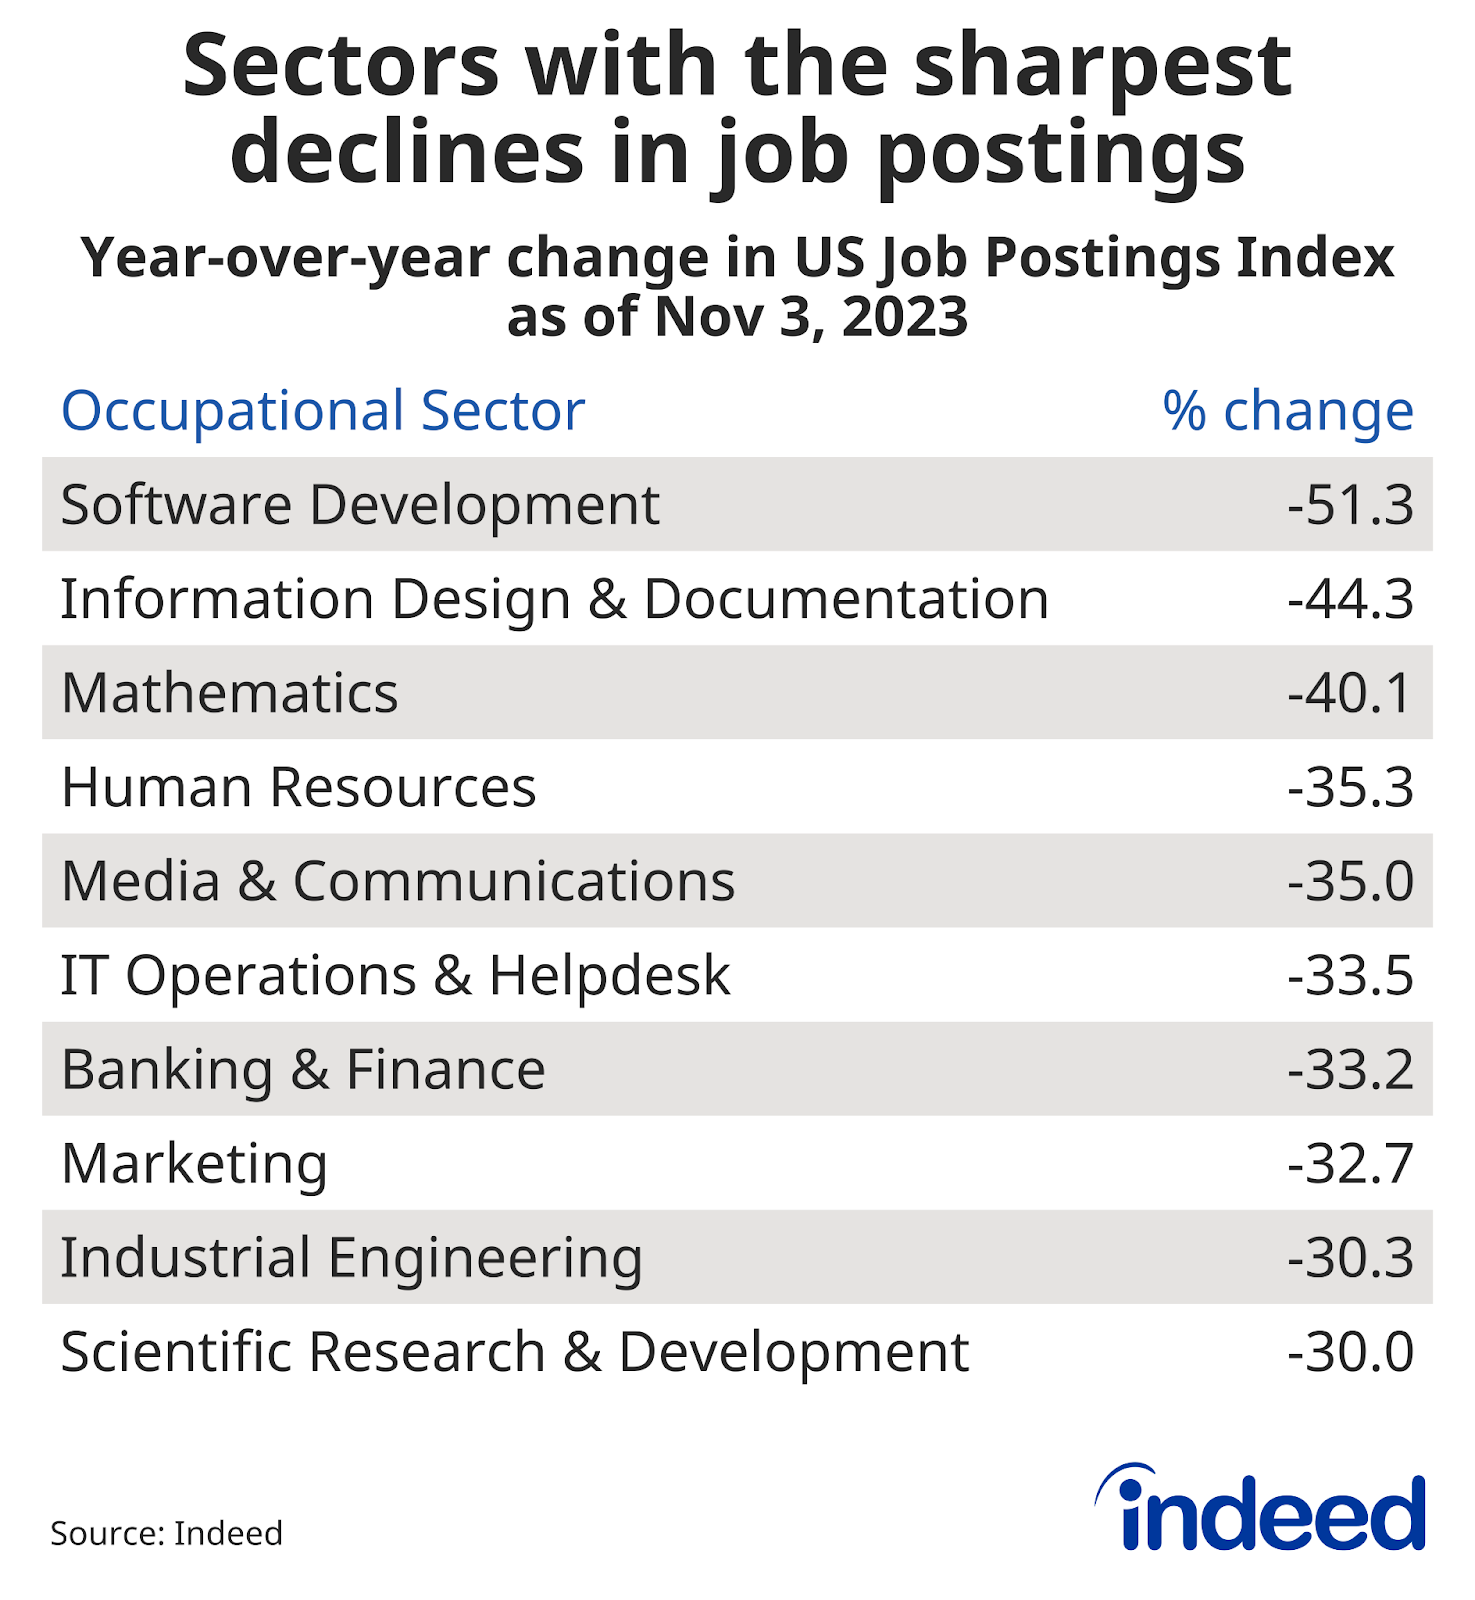 A table with the title “Sectors with the sharpest declines in job postings” shows the year-over-year change in the Job Postings Index for different occupational sectors. The largest decline is for Software Development job postings, down 51%.